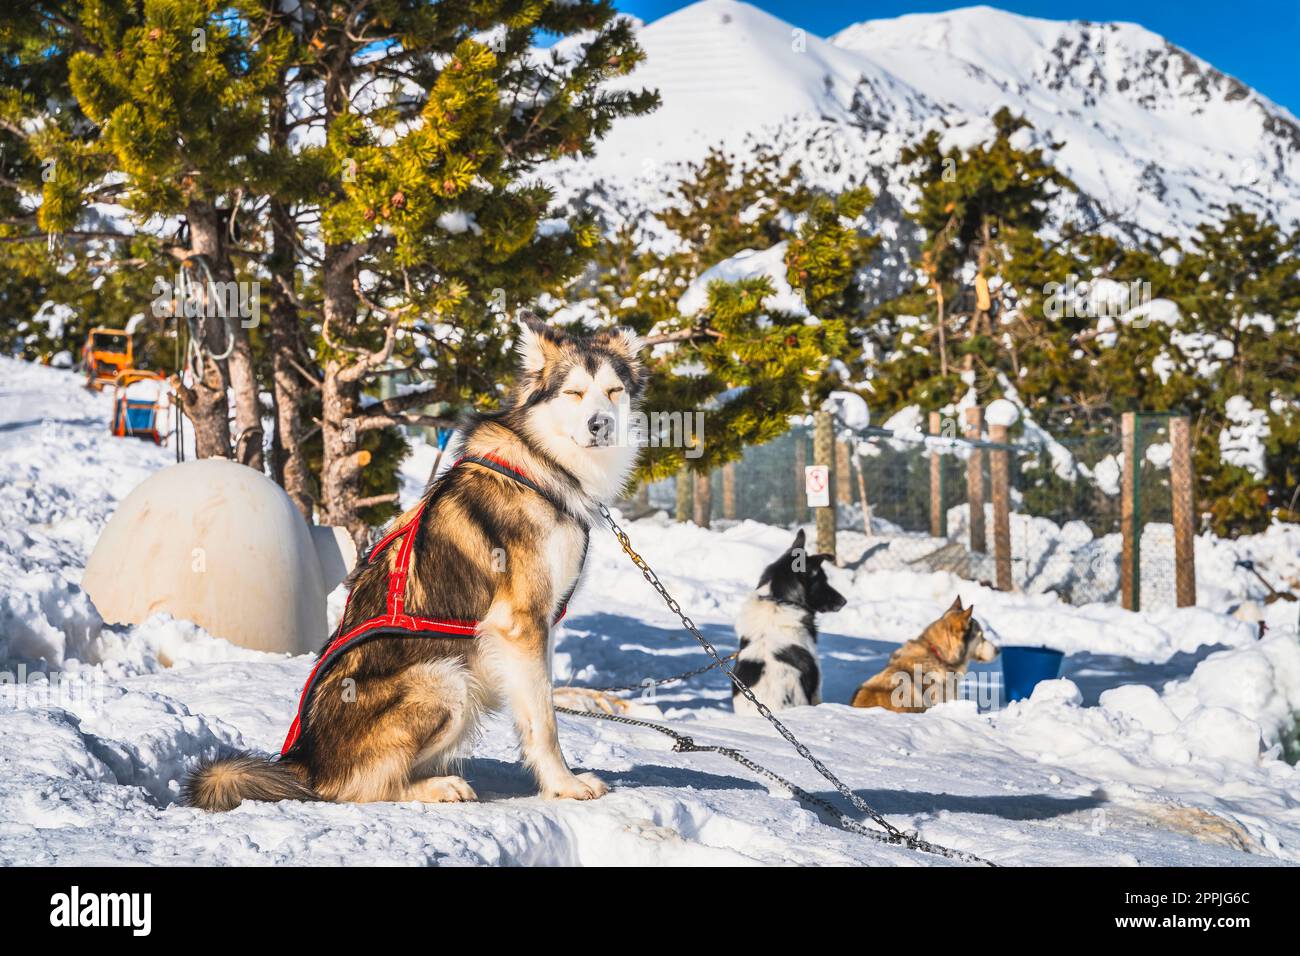 Huskey dogs sitting on the snow, waiting to pull sleigh, Andorra, Pyrenees Stock Photo